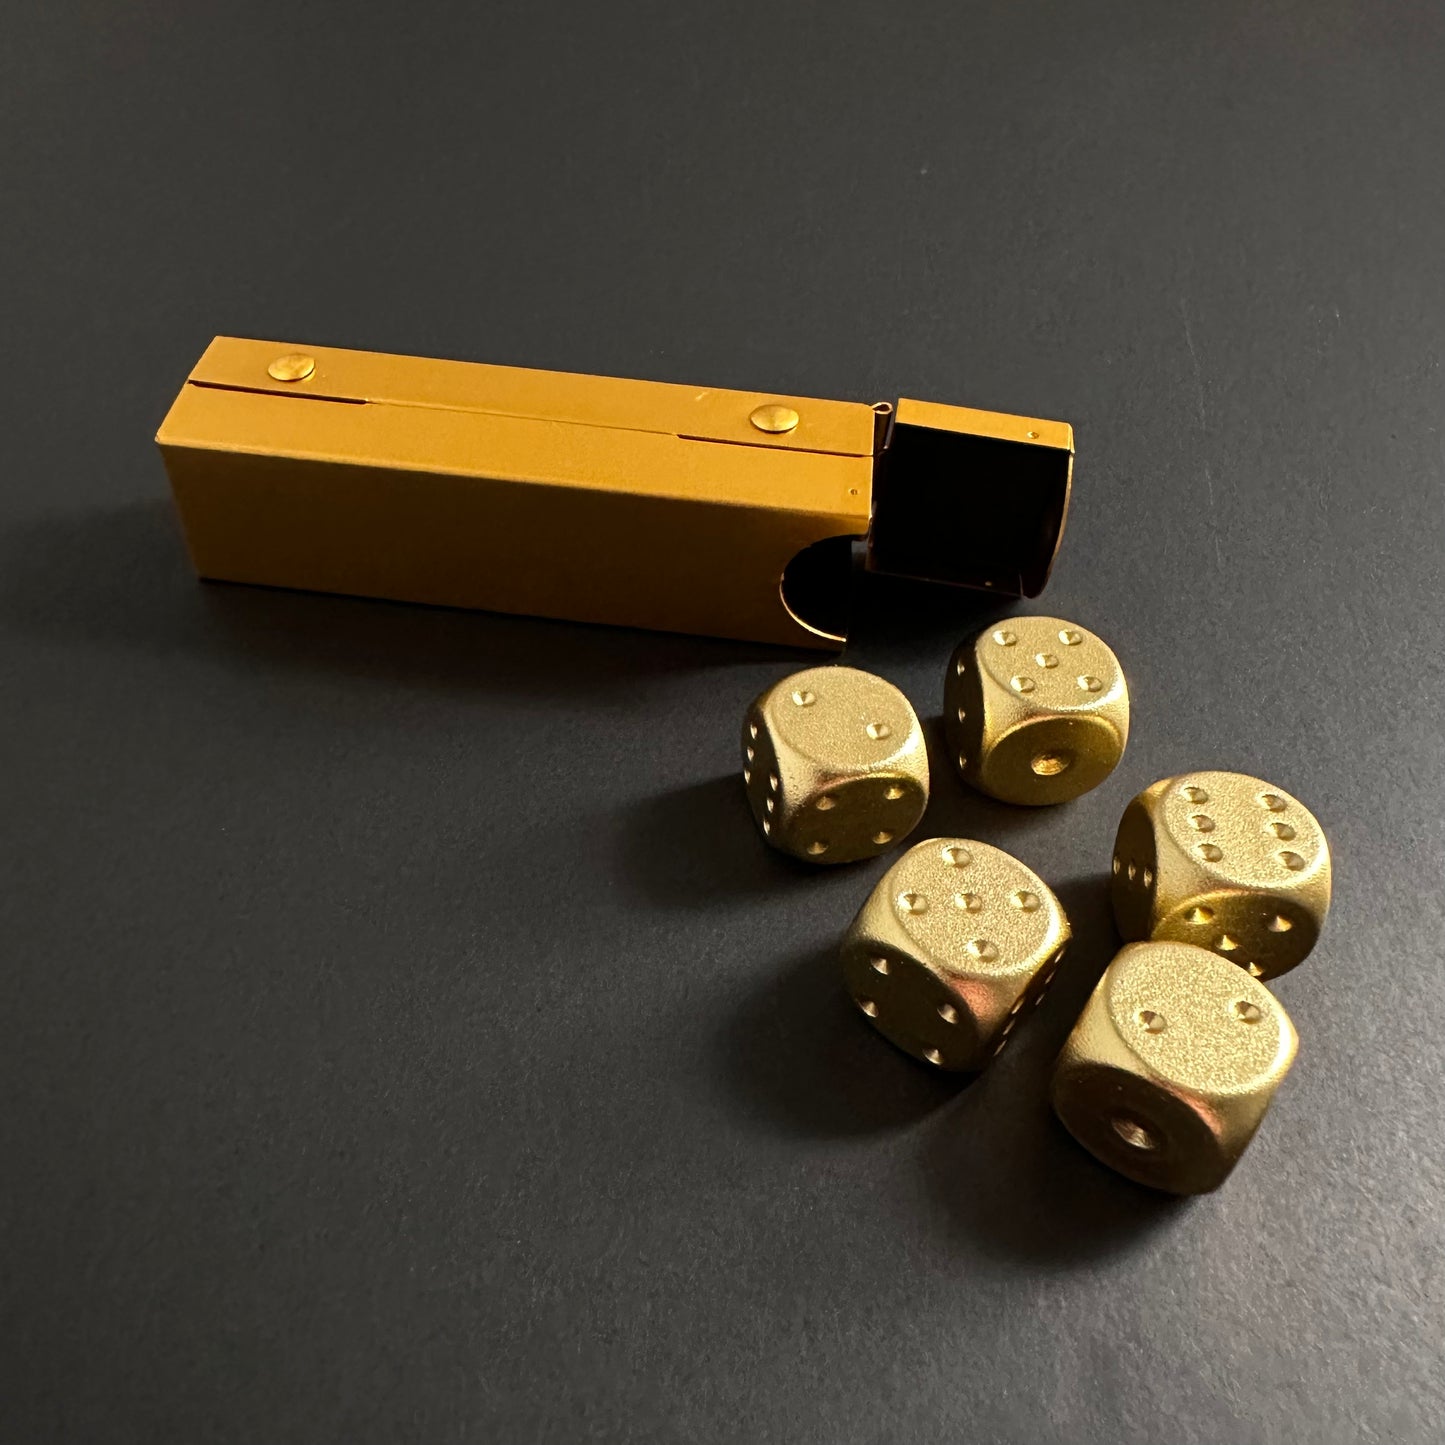 Gold Metal Dice Set with Carrying Case